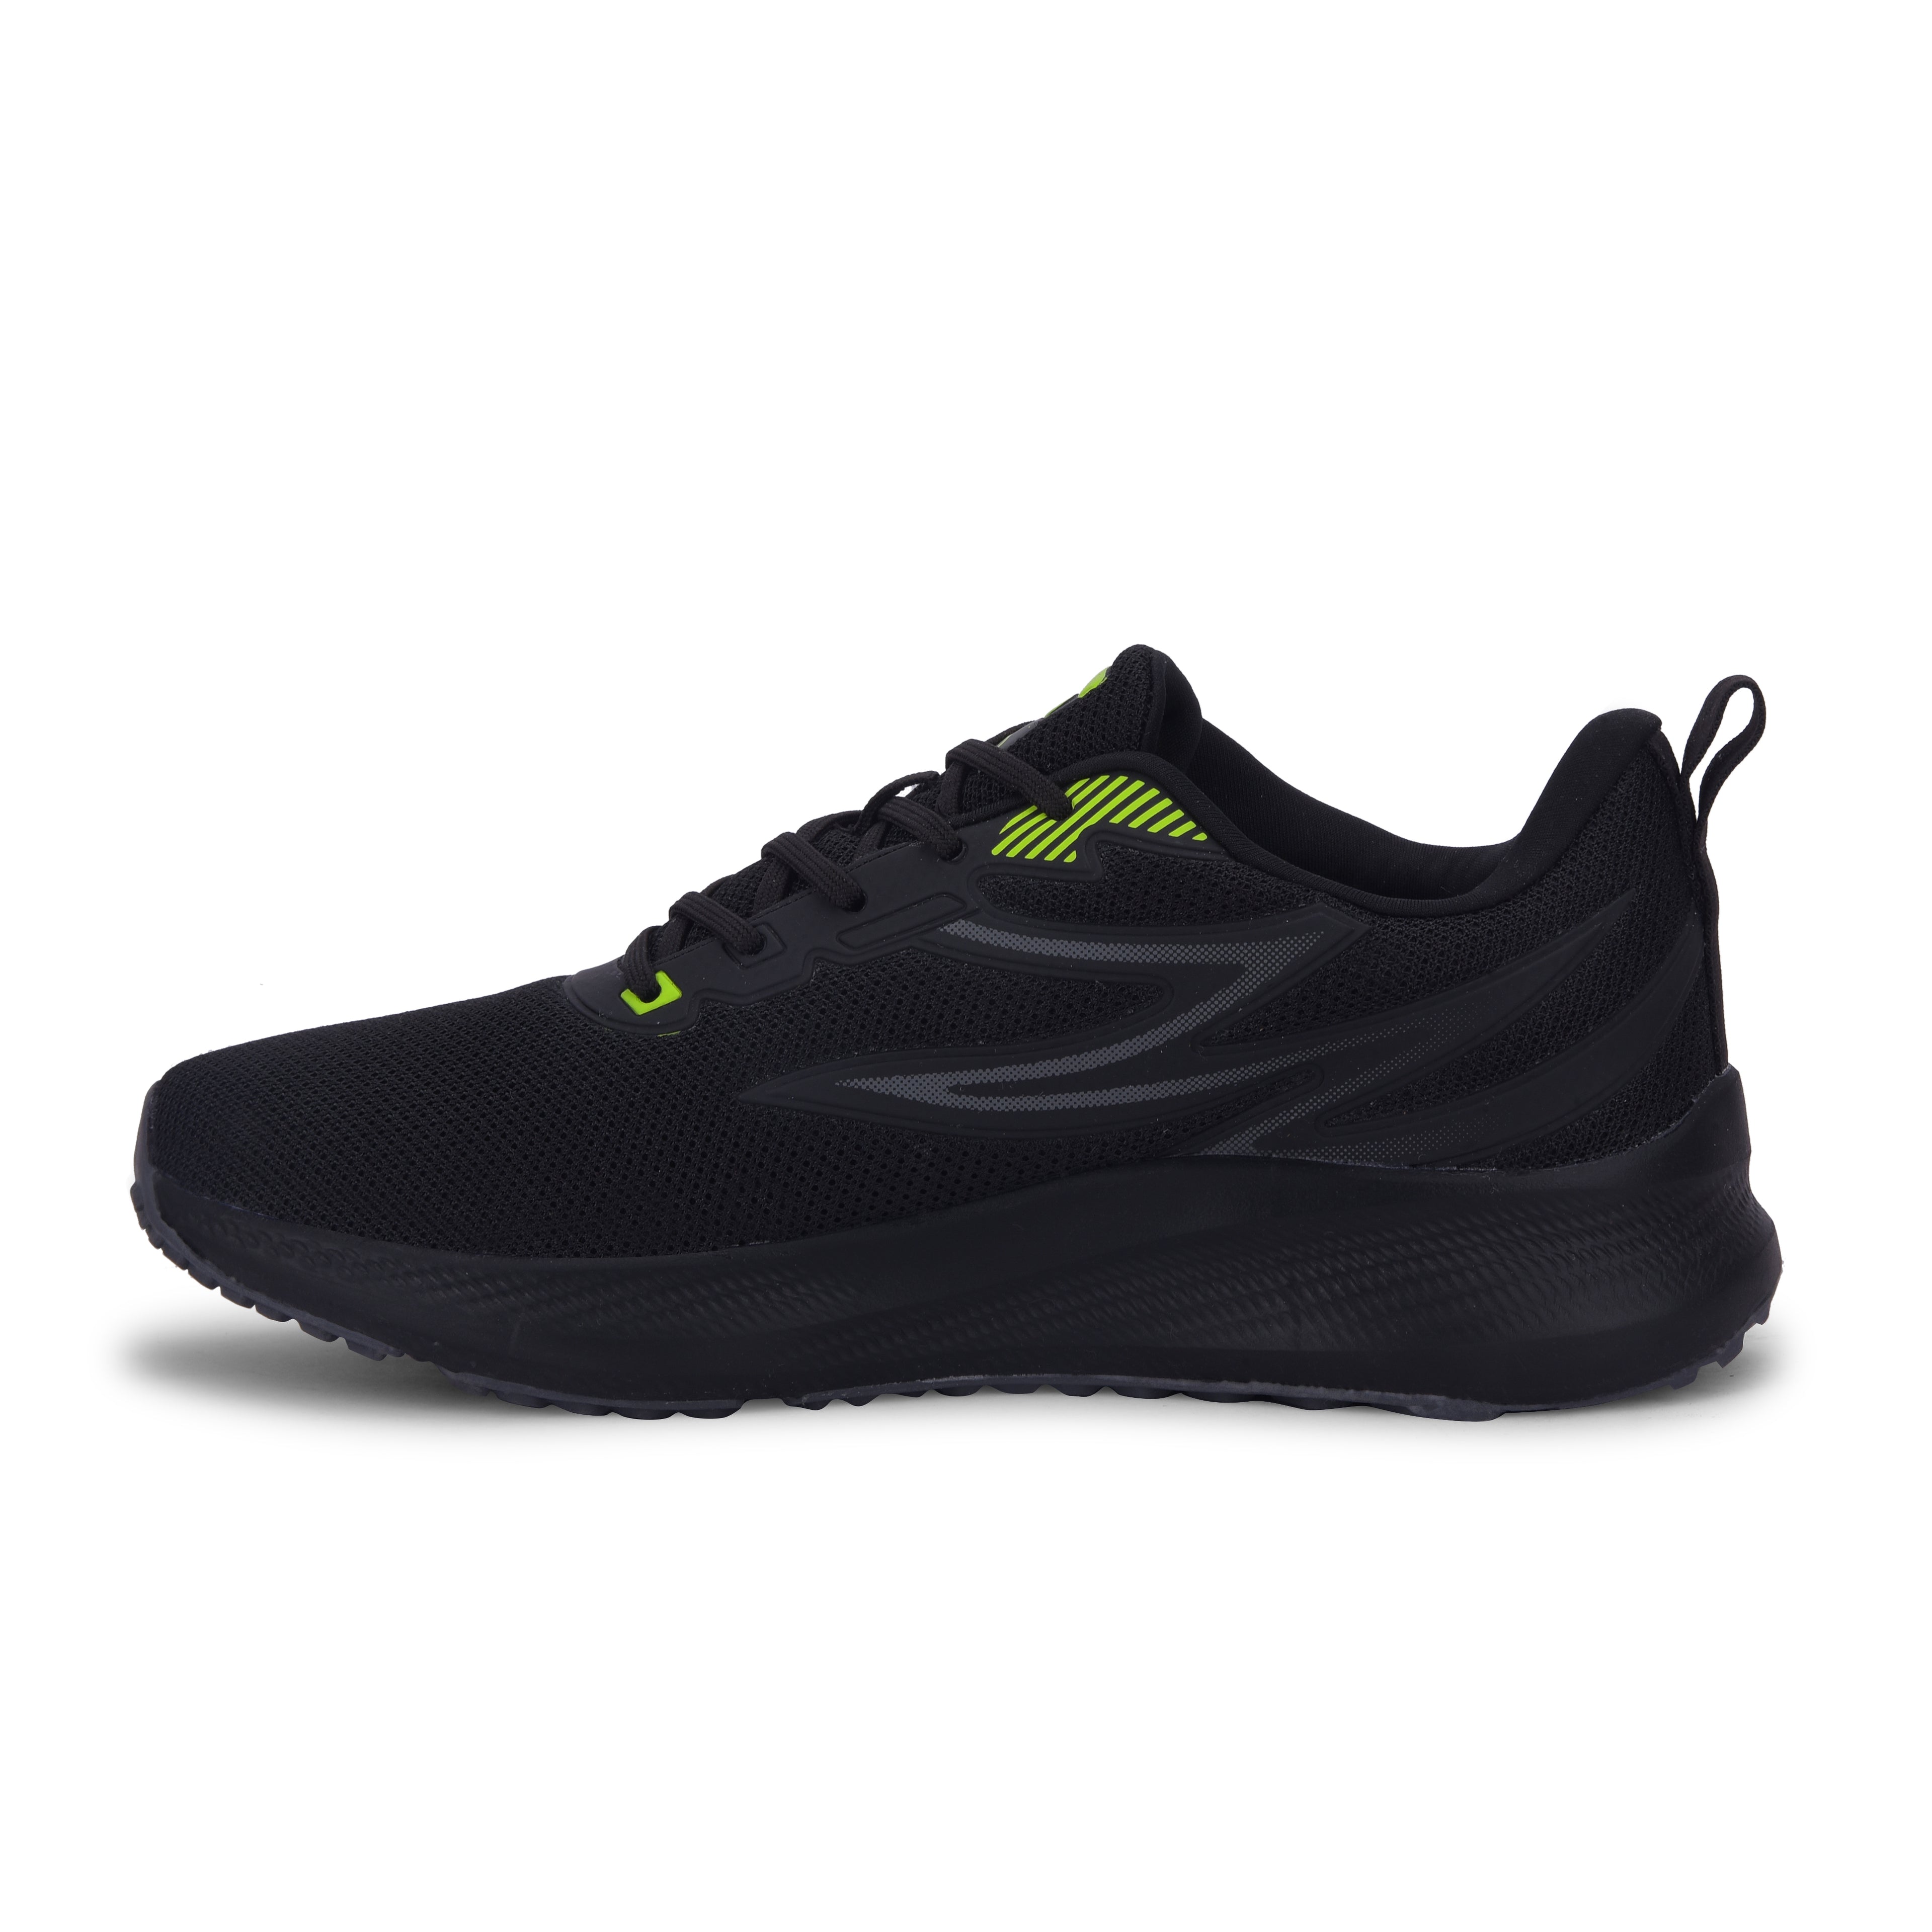 Calcetto CLT-2011 Black Running Shoes For Men